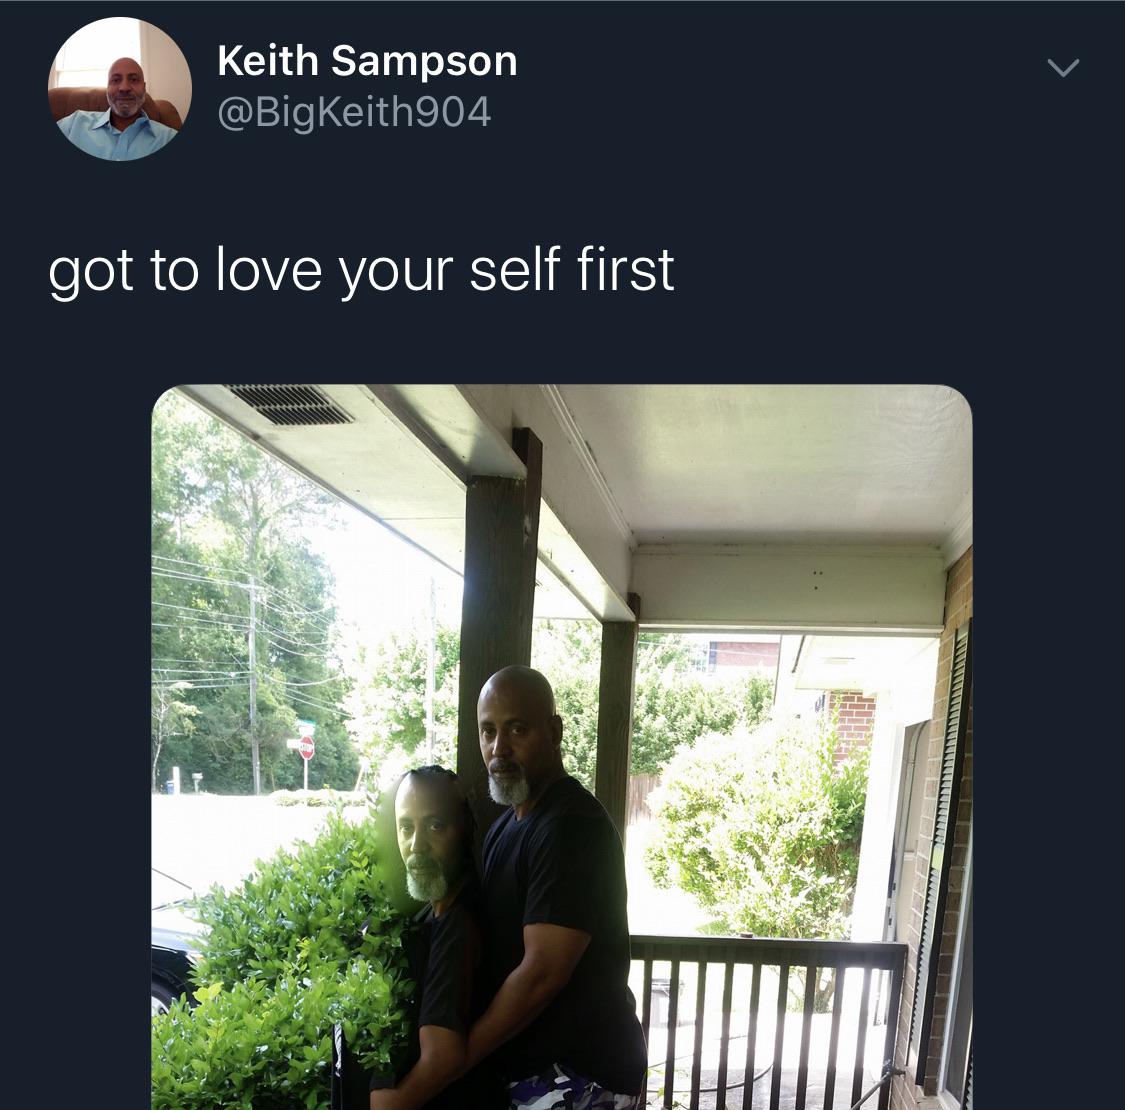 presentation - Keith Sampson got to love your self first